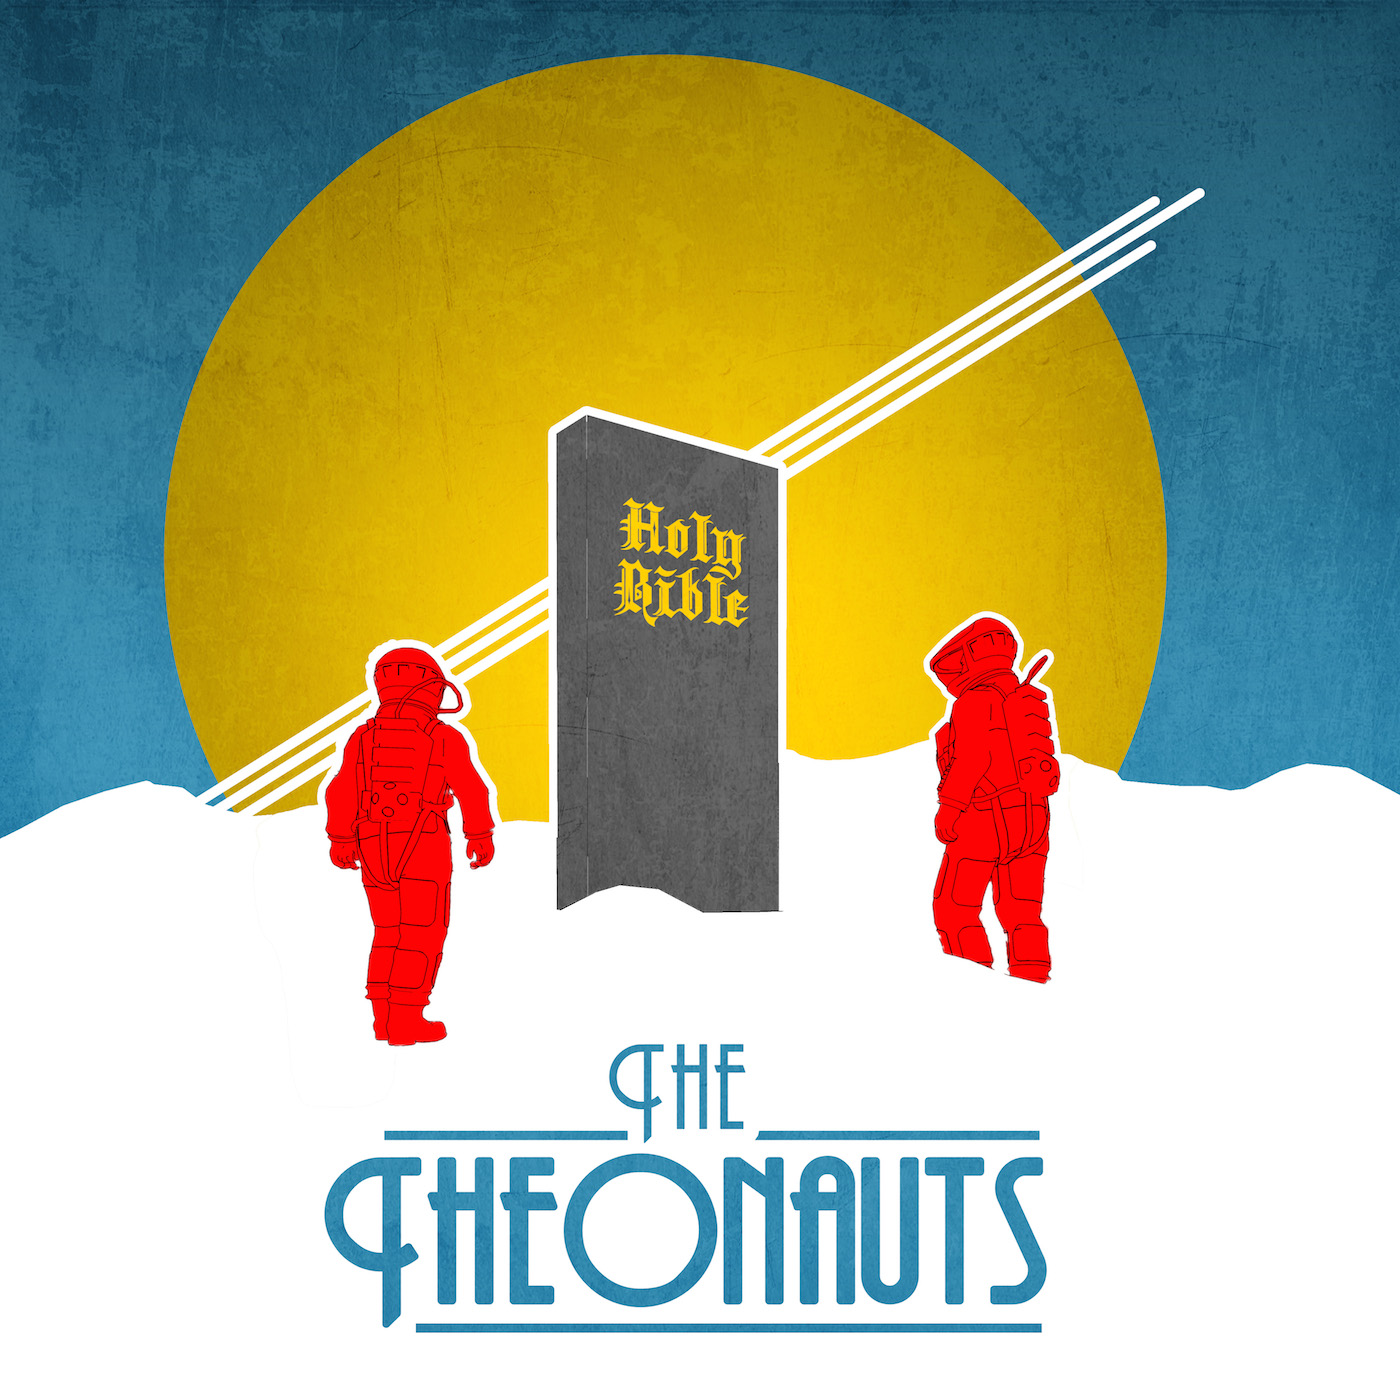 Theonauts 001 : Noah Movie, World Vision News, and Understanding the Bible